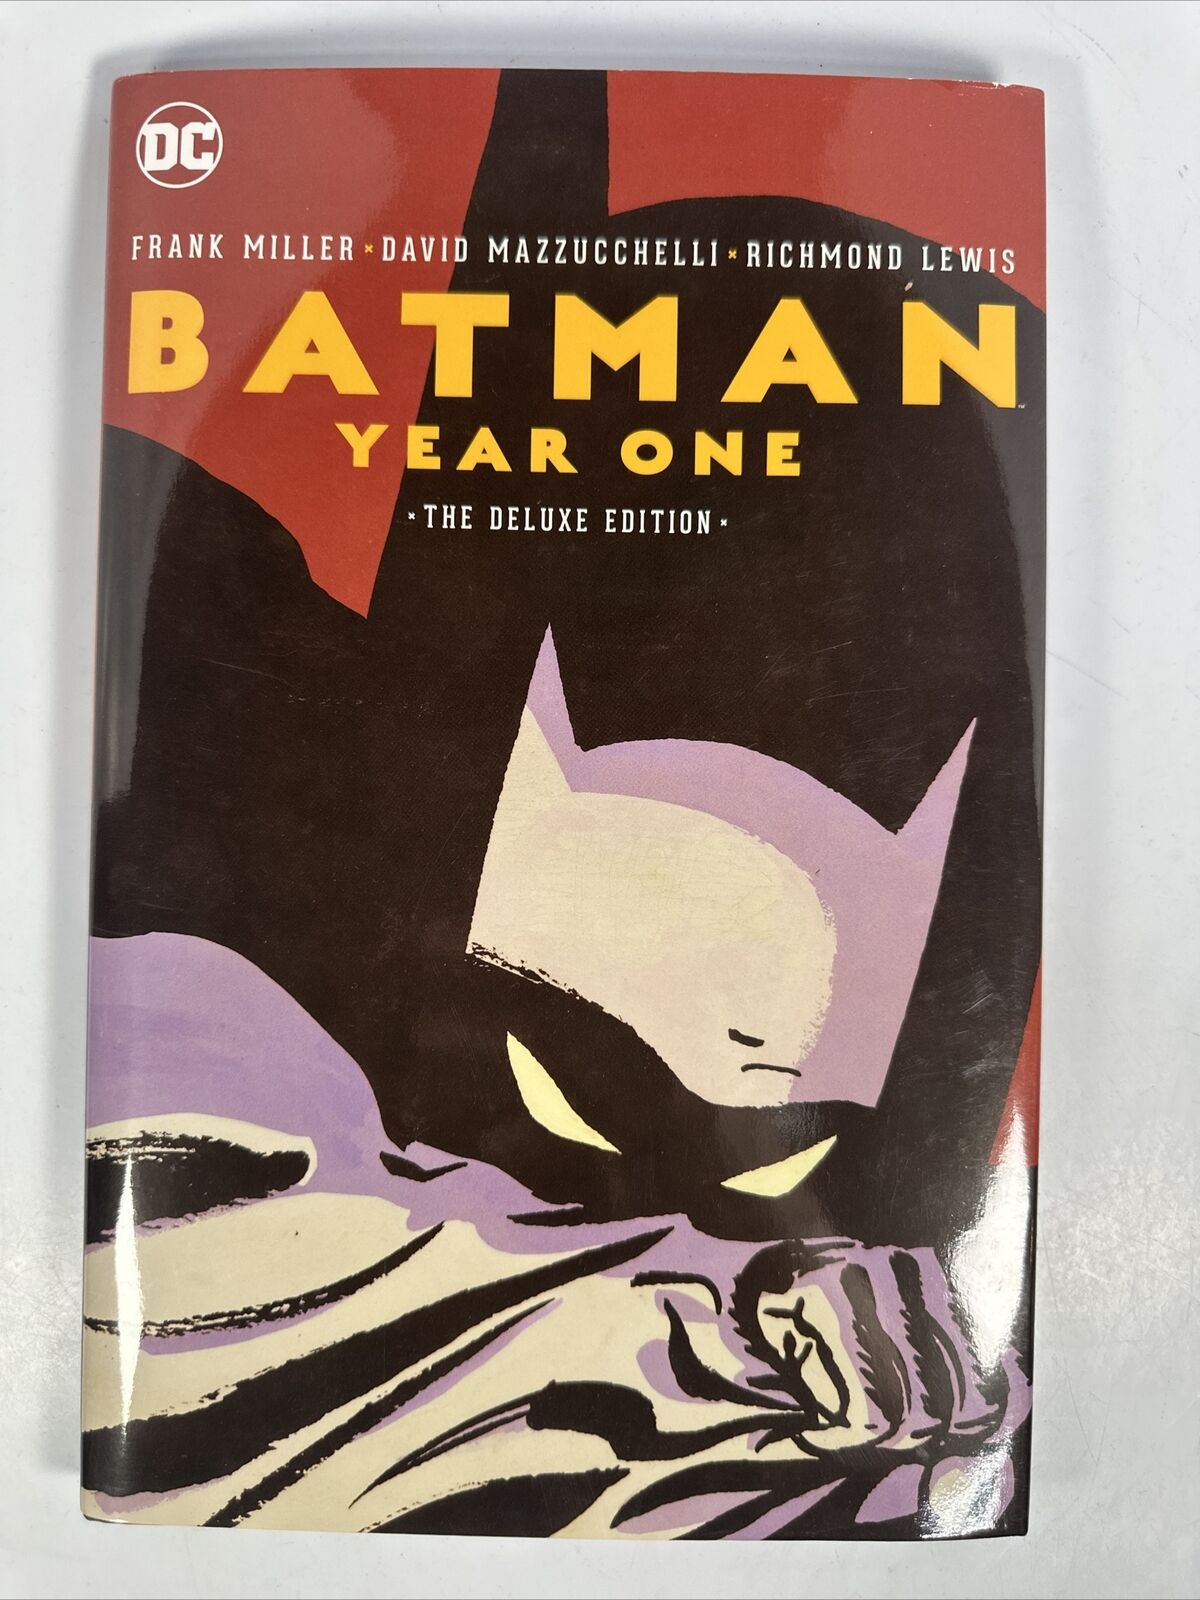 Batman: Year One - The Deluxe Edition Hardcover (DC Comics)